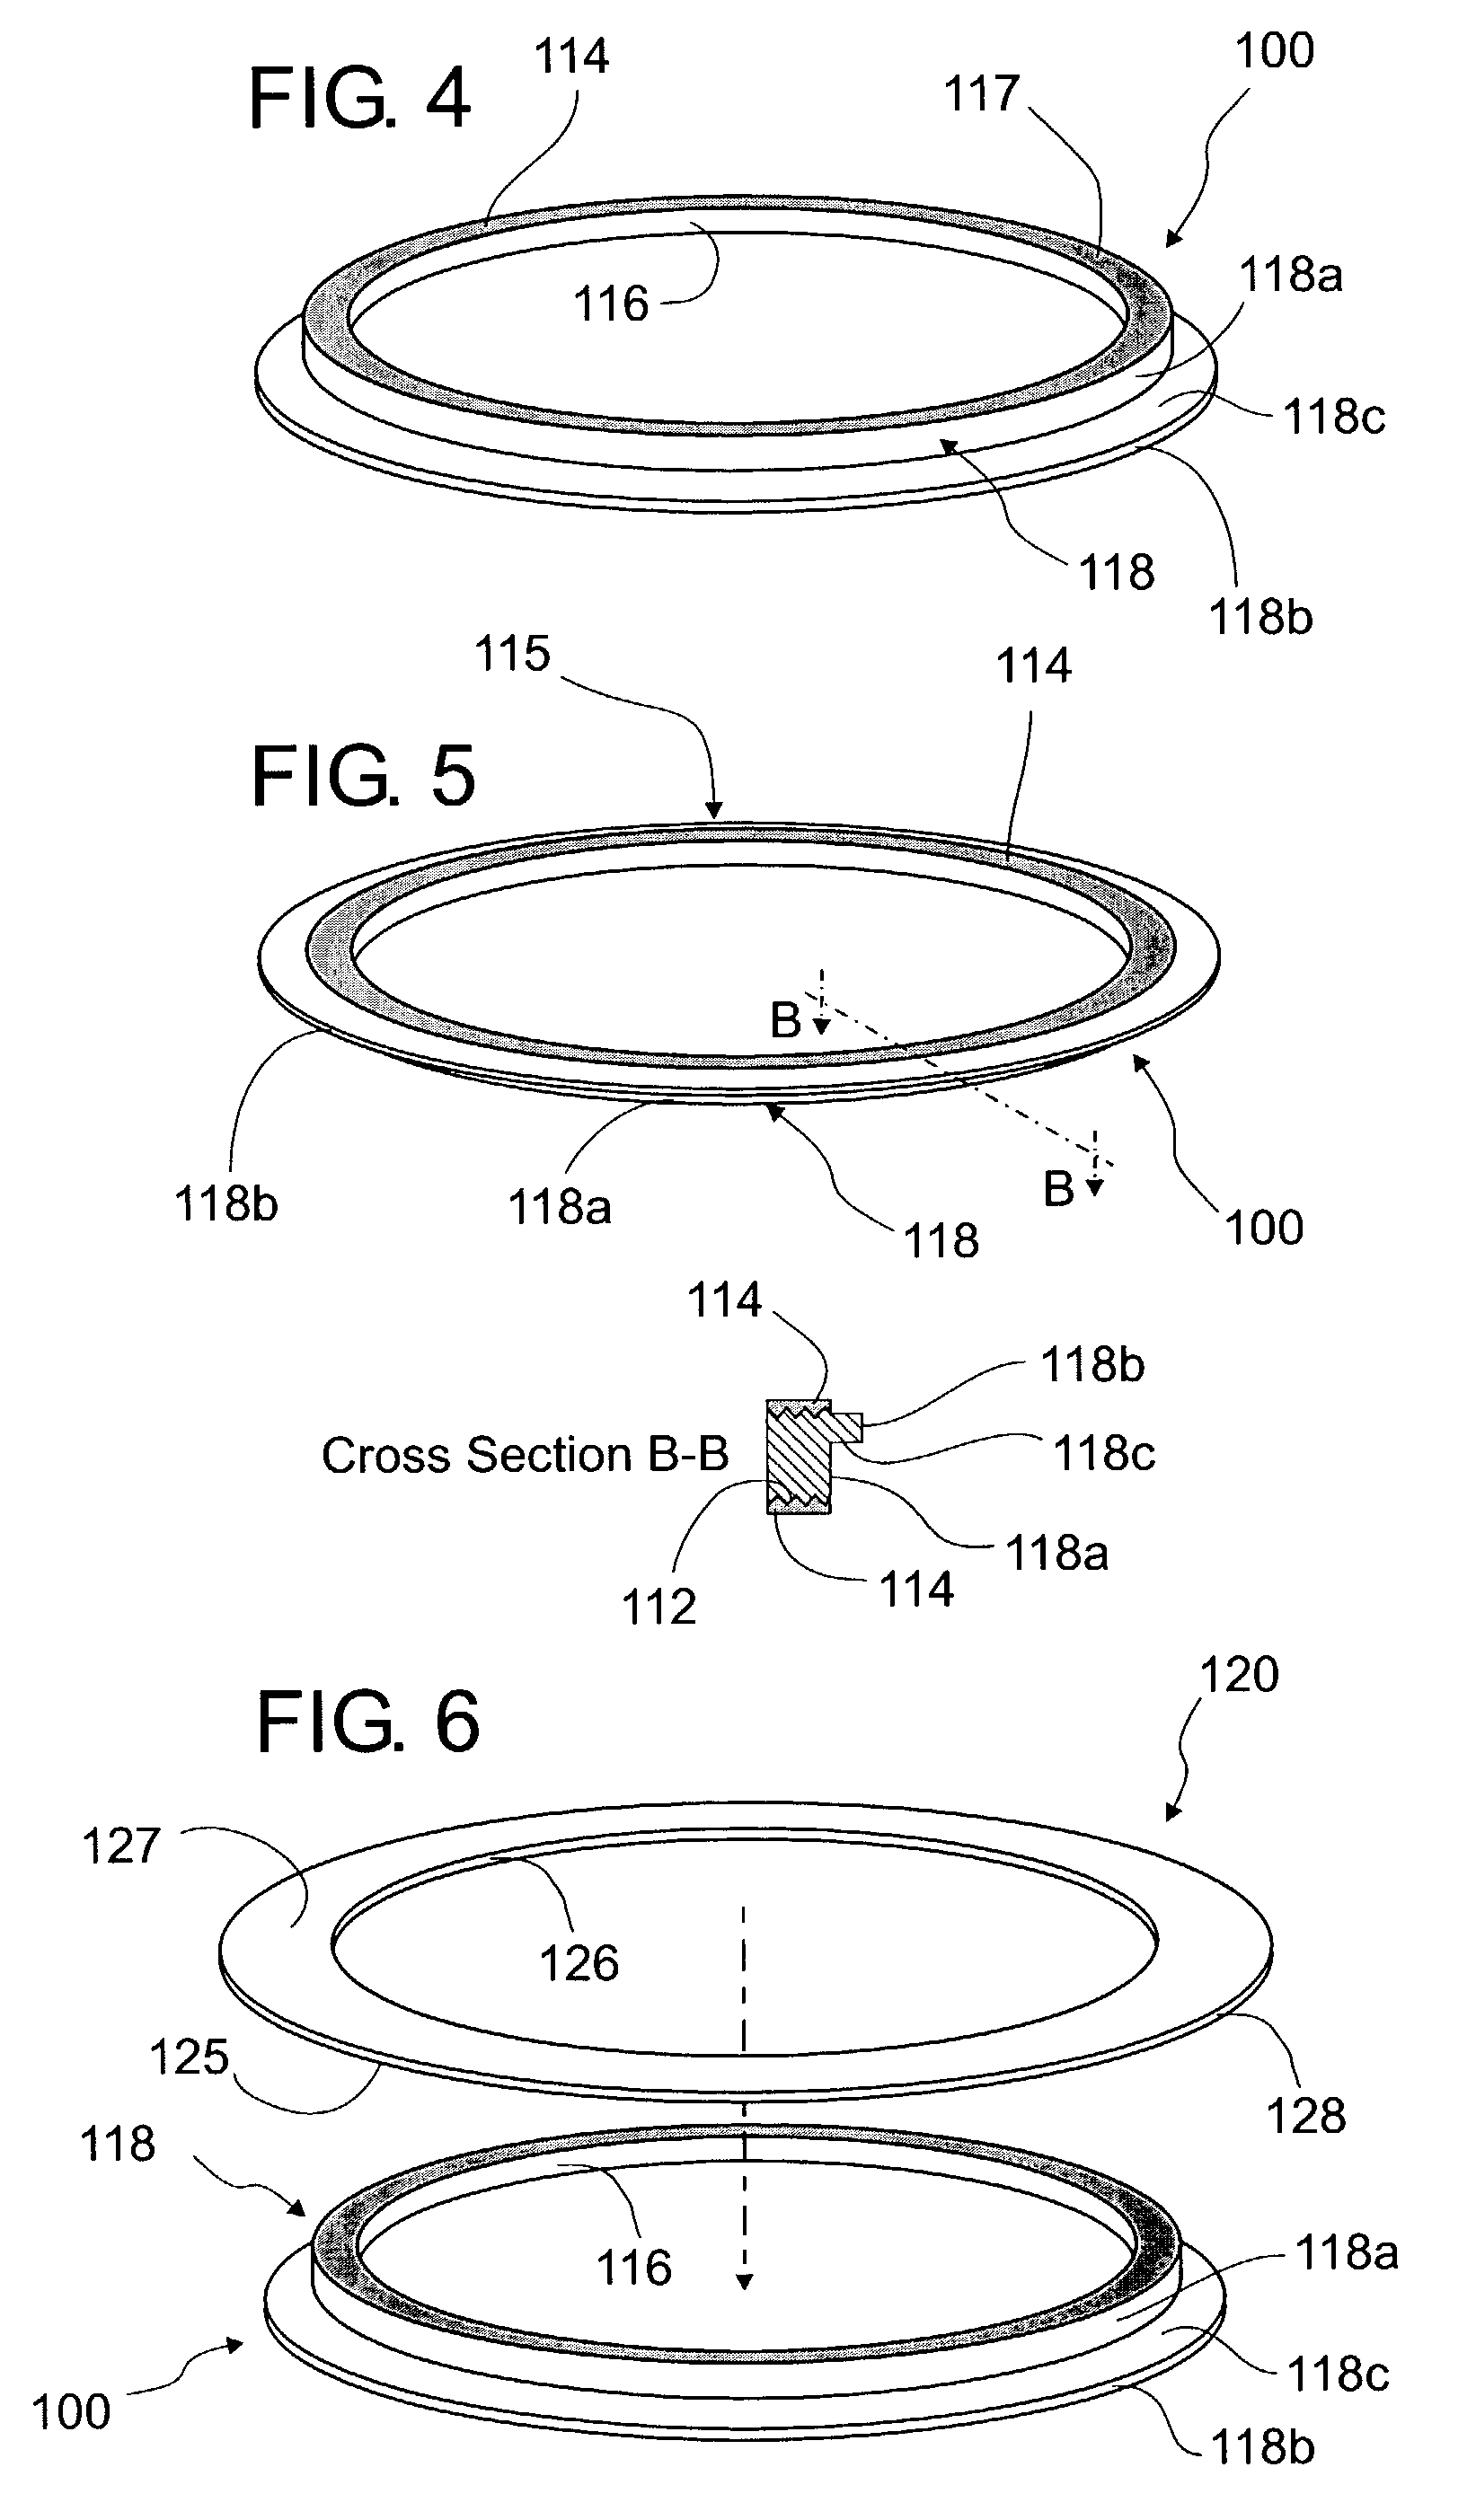 Gasket seal for flanges of piping and equipment, a method for manufacturing gasket seals, and a sealing ring for a gasket seal